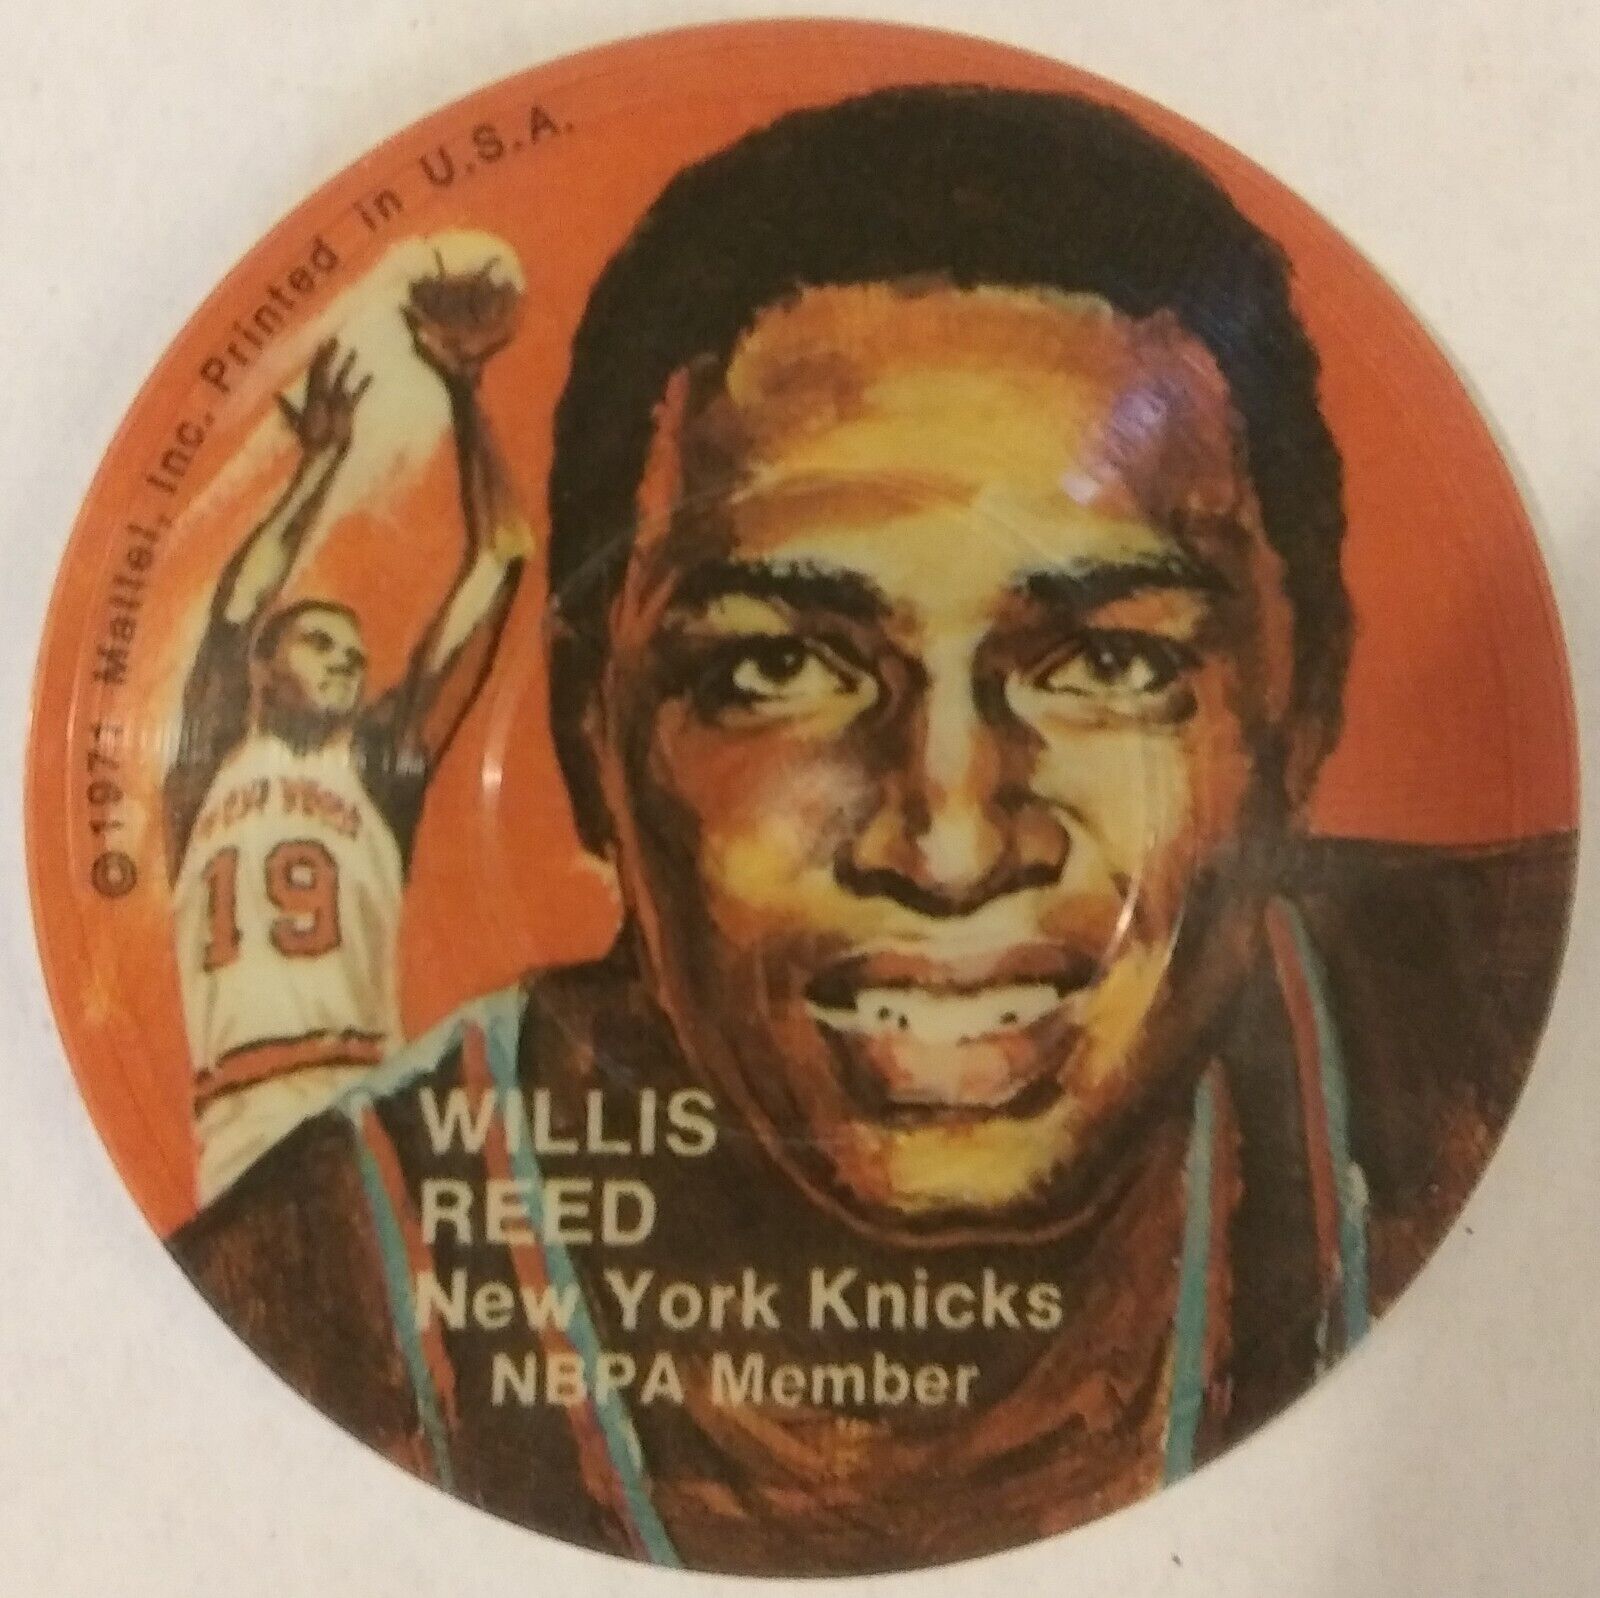 1971 Mattel Instant Replay WILLIS REED Double-Sided Mini Record Disc - UNPLAYED